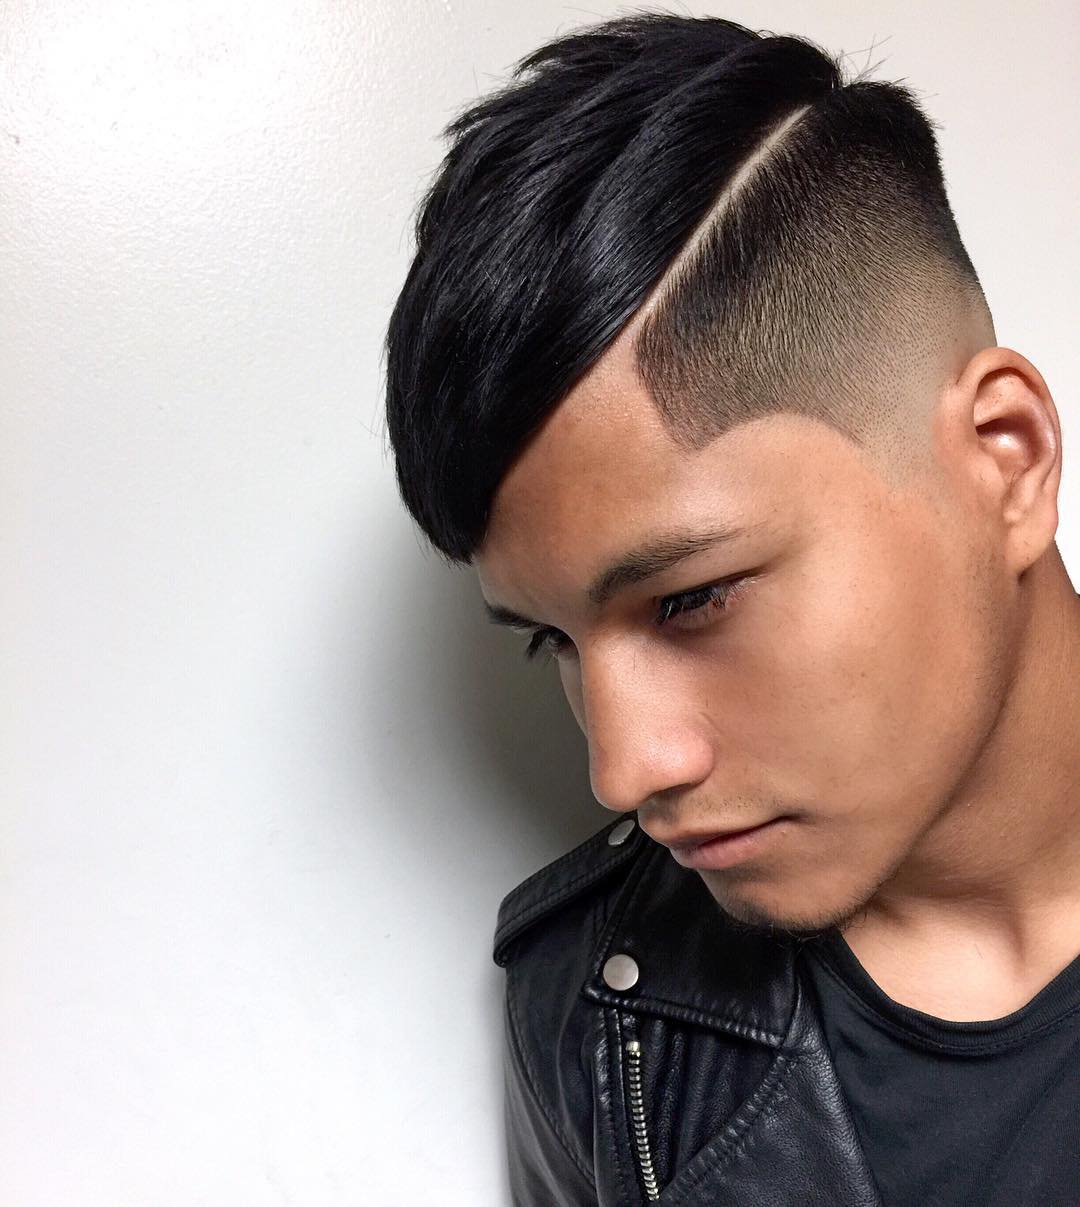 Crop haircut with high fade